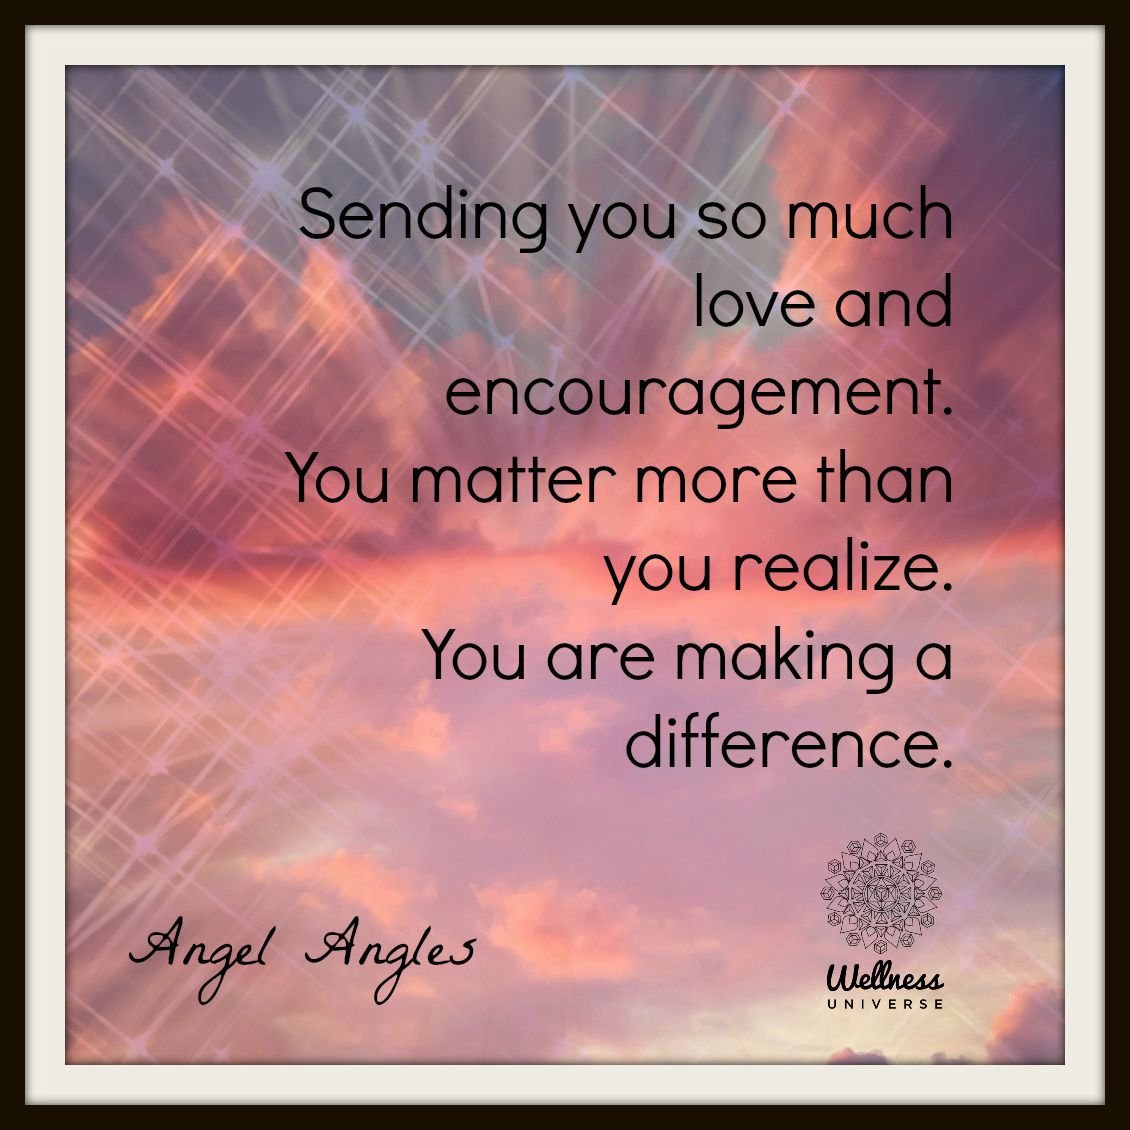 A little love and encouragement from your Angels. 

Sending you so much love and encouragement. You matter more than you realize. You are making a difference, dear heart. Amen, and so it is. 

Blessings of love, joy, and peace.
Love,
Janette 
.
.
#WU